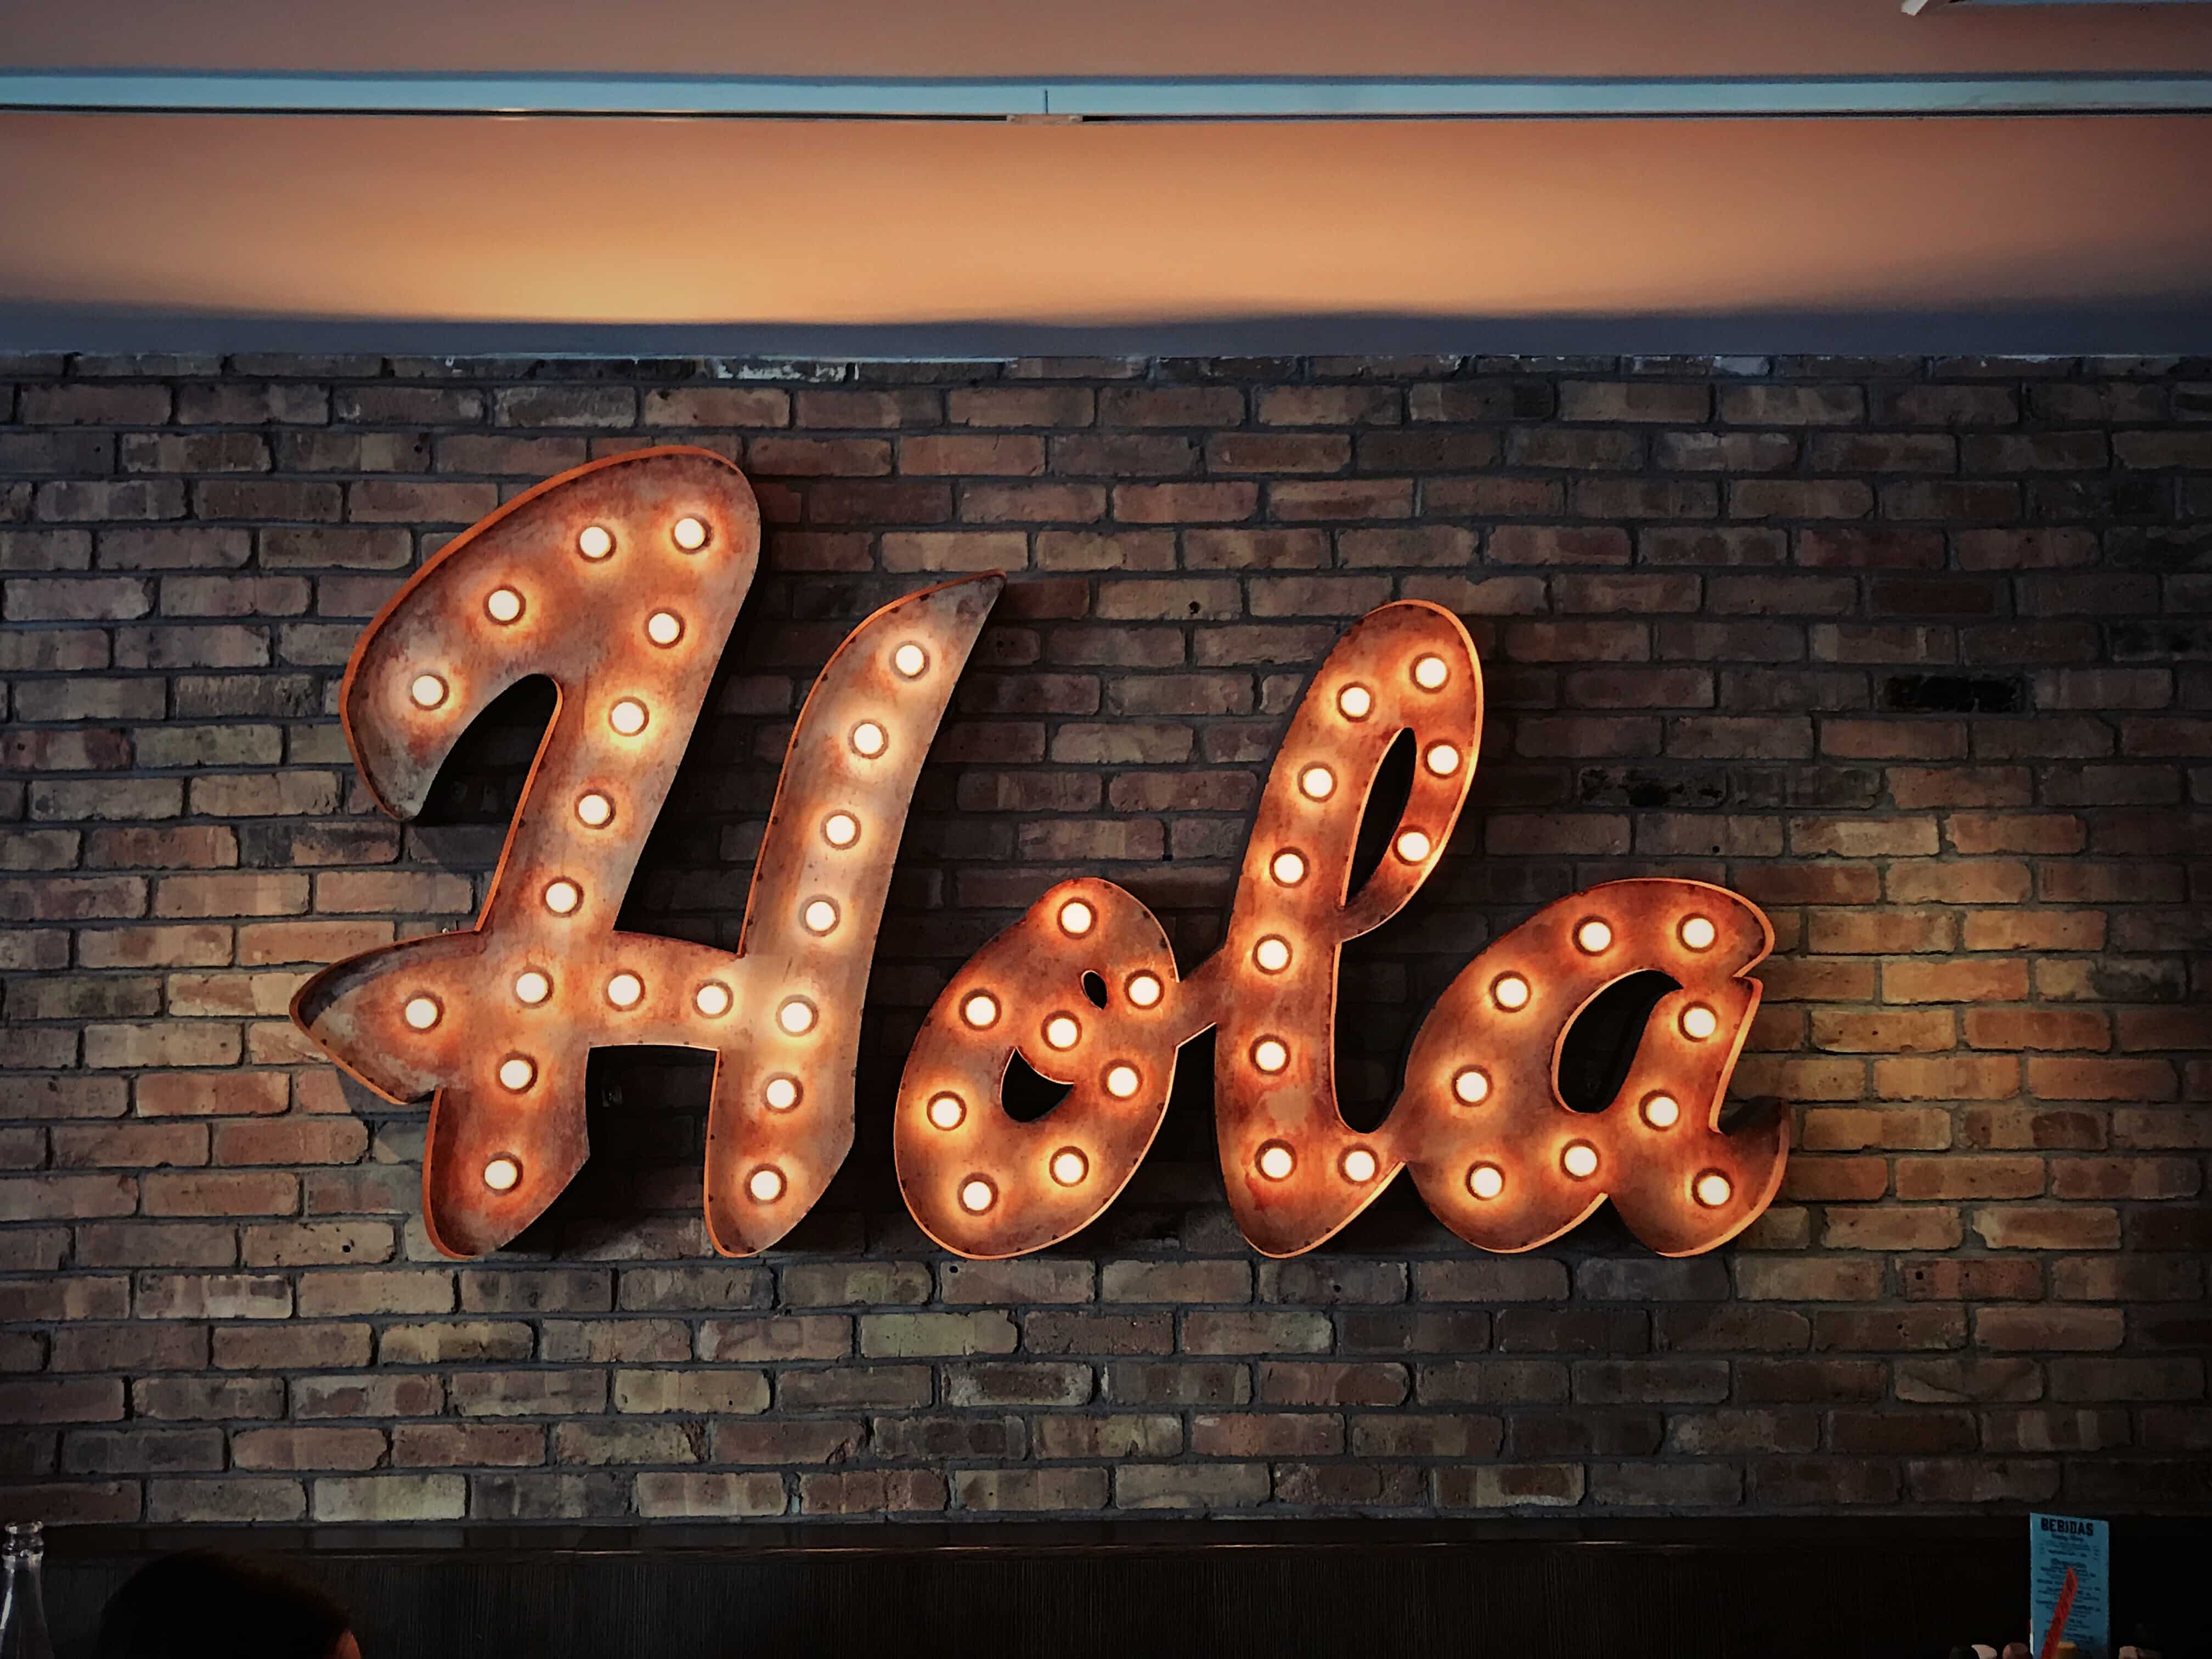 An "Hola" sign with lights